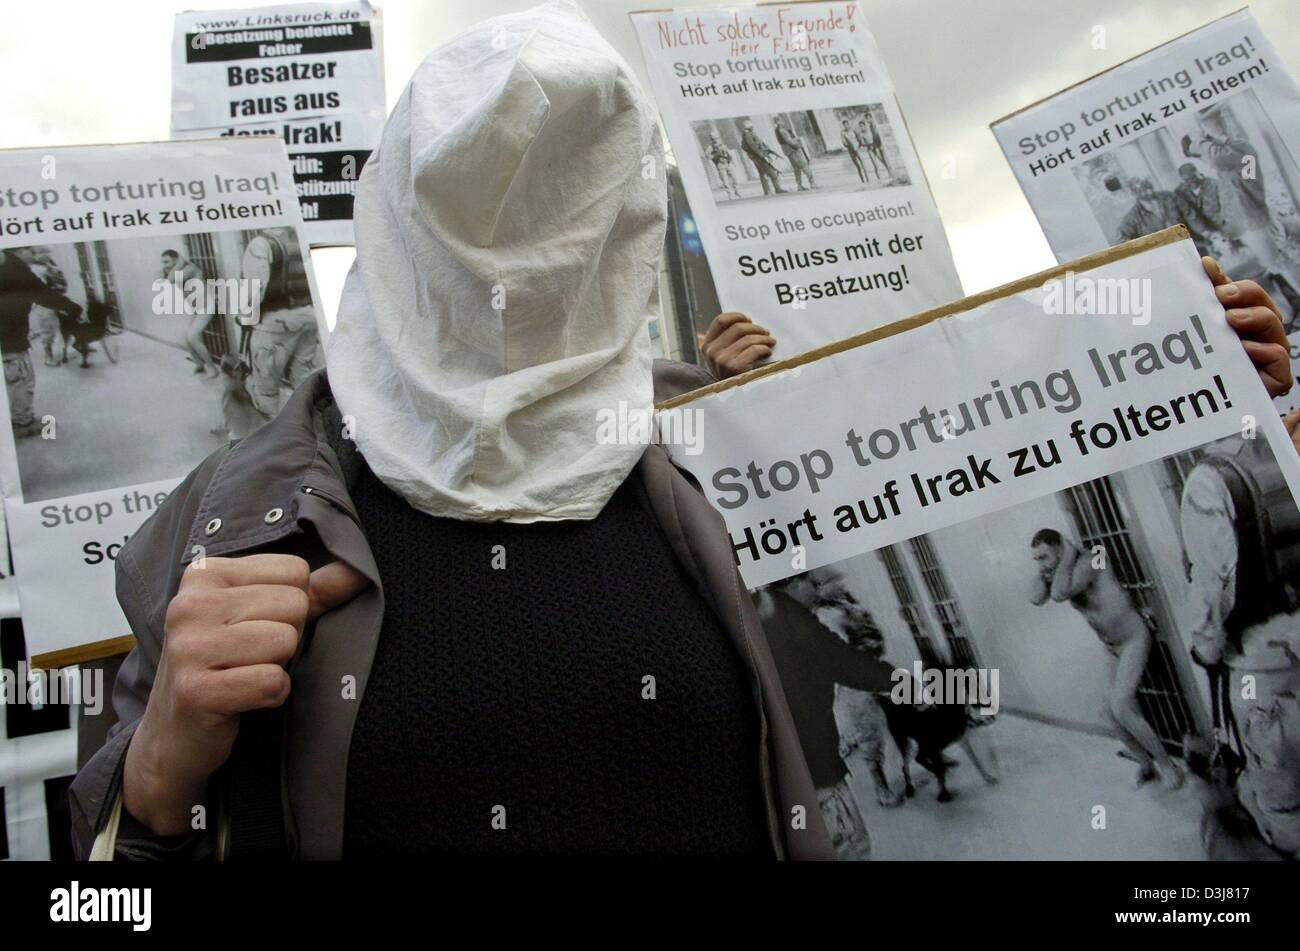 (dpa) - A woman opposing the USA's policy in Iraq demonstrates with a bag over her head and a sign in her hand saying 'Stop torturing Iraq!' in Berlin, Germany, 13 May 2004. Because of accusations of the mistreatment of Iraqi prisoners by British and US-American soldiers in Iraq, activists gathered in front of the USA's embassy in Berlin to voice their protests. Stock Photo